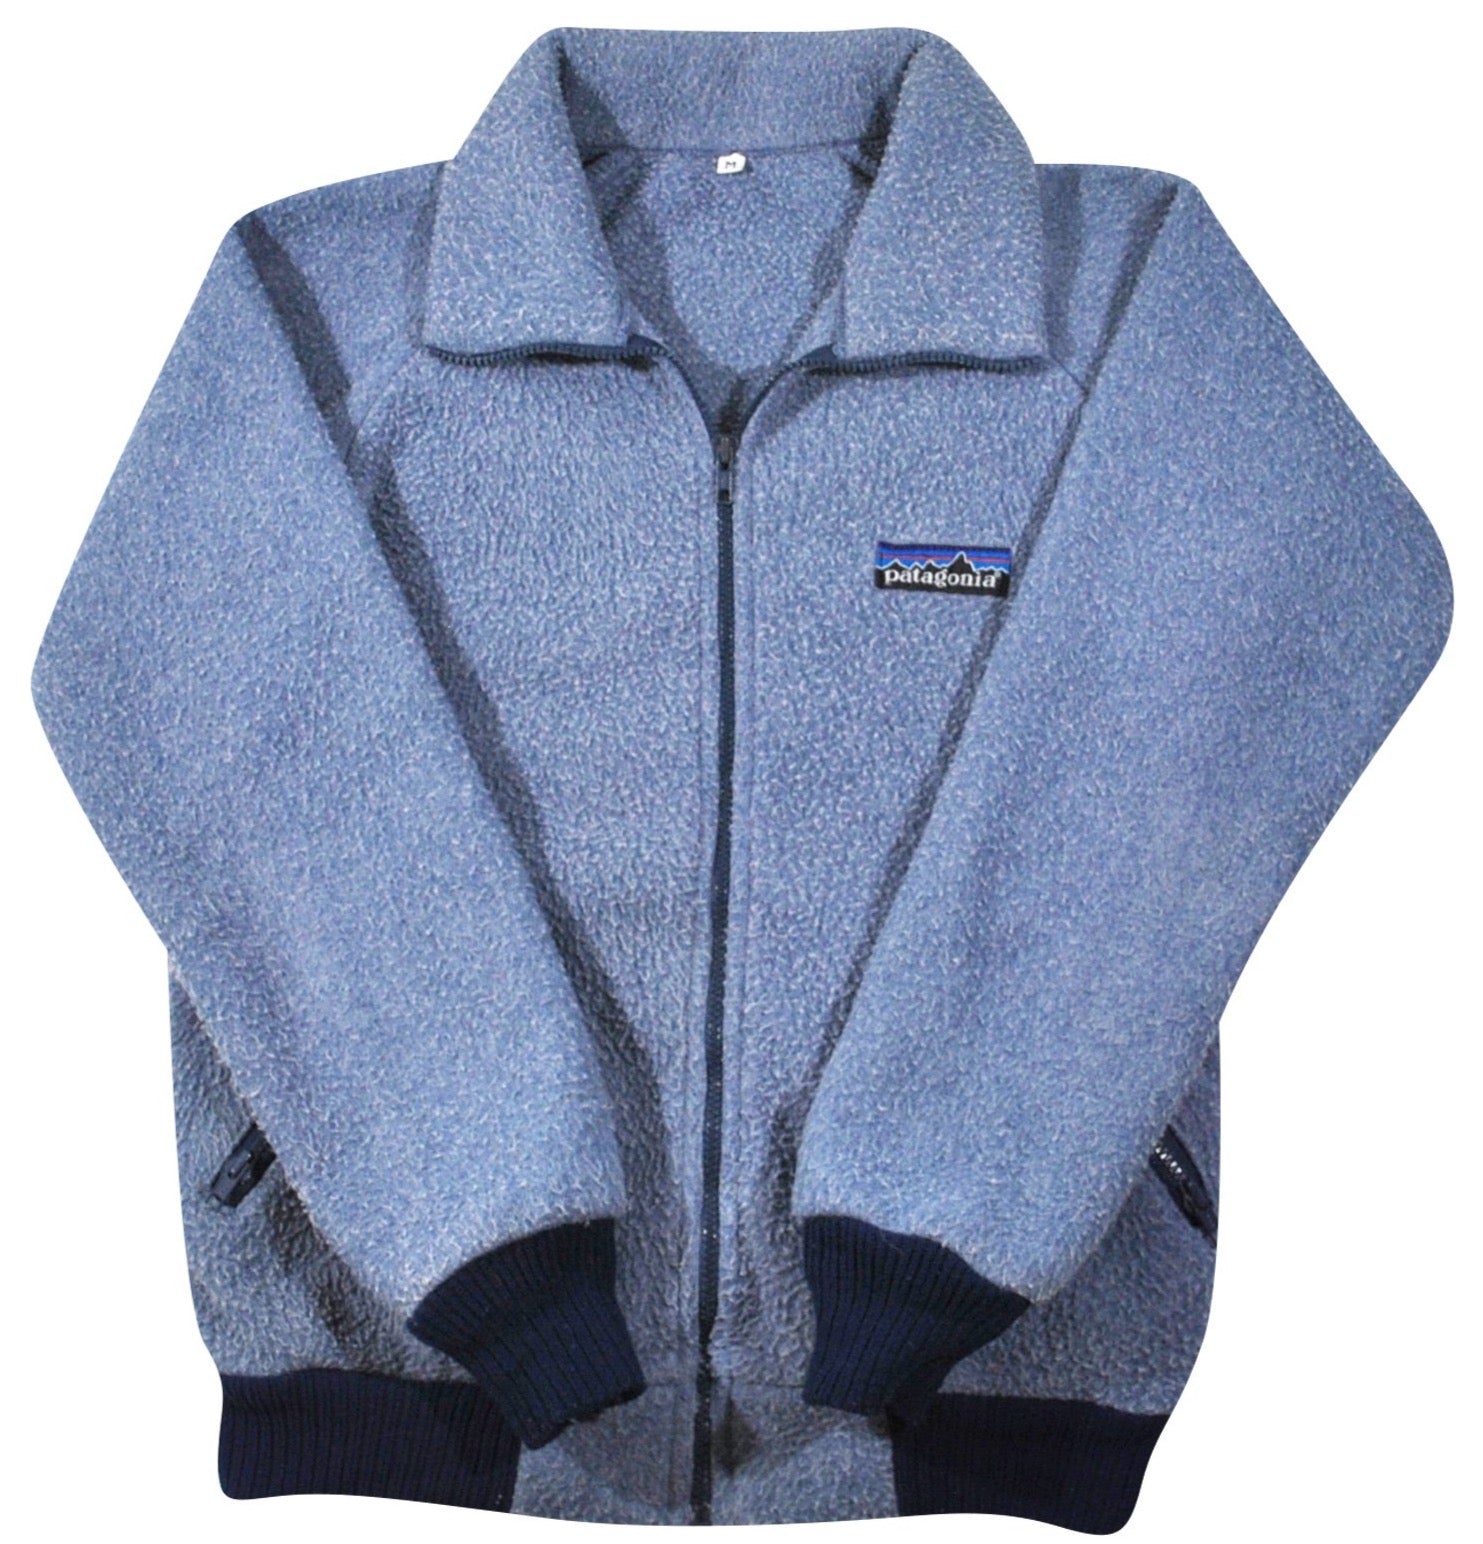 Vintage Patagonia Fleeces: Fluff That's Worth a Fortune - WSJ